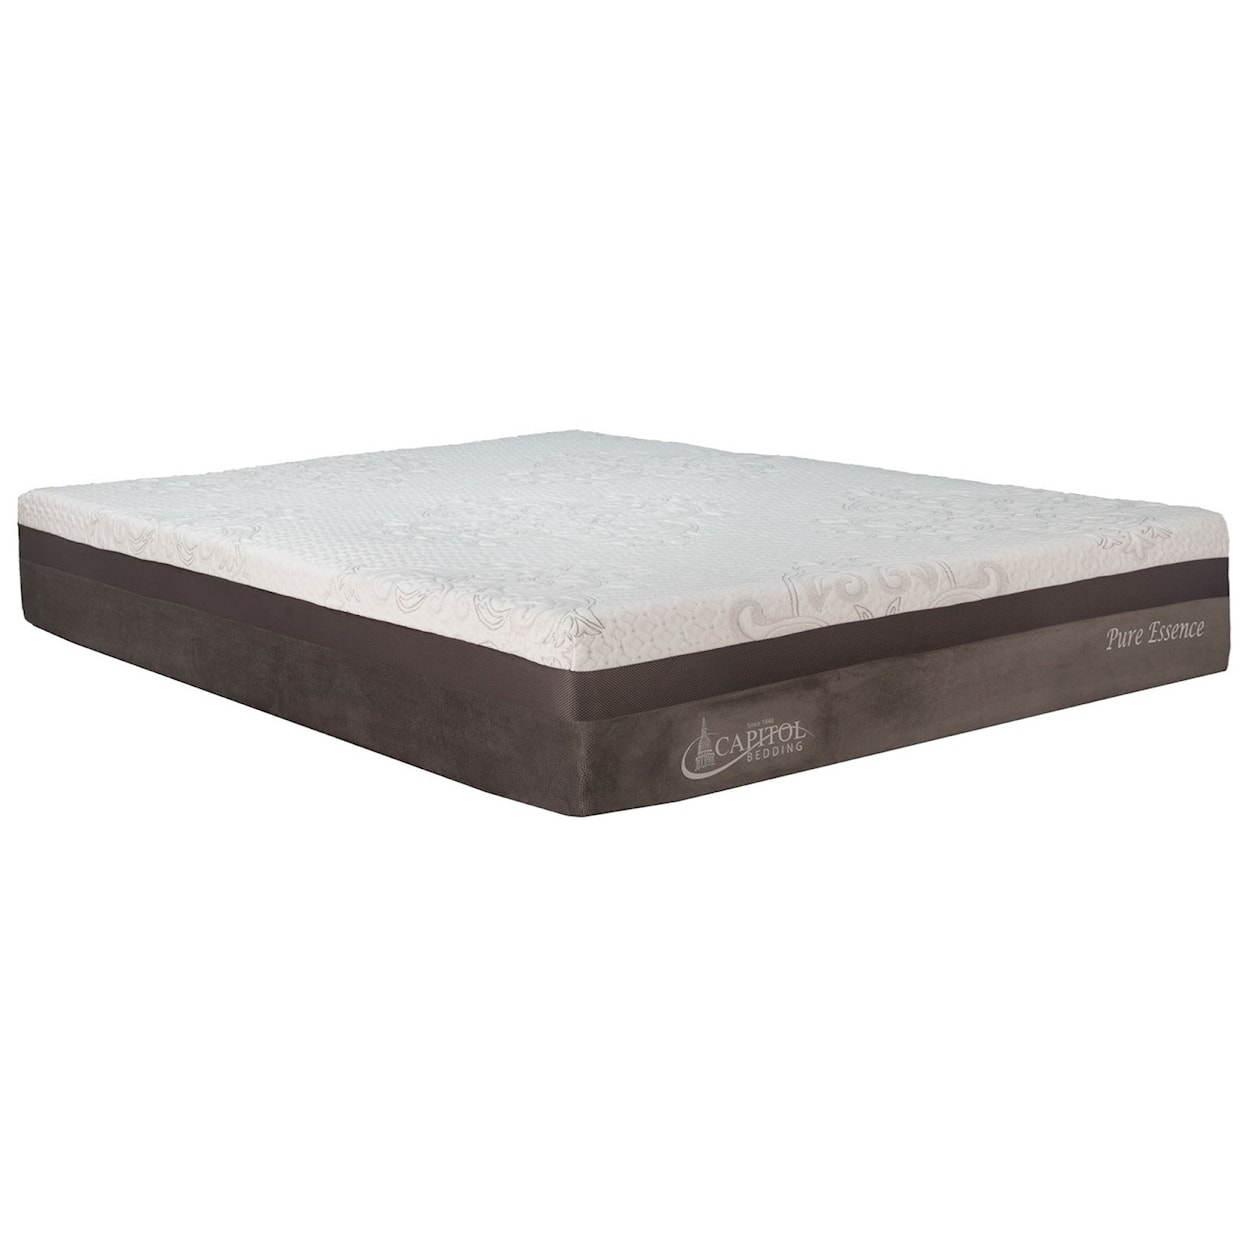 Capitol Bedding Pure Essence II Firm Full 11" Gently Firm Mattress